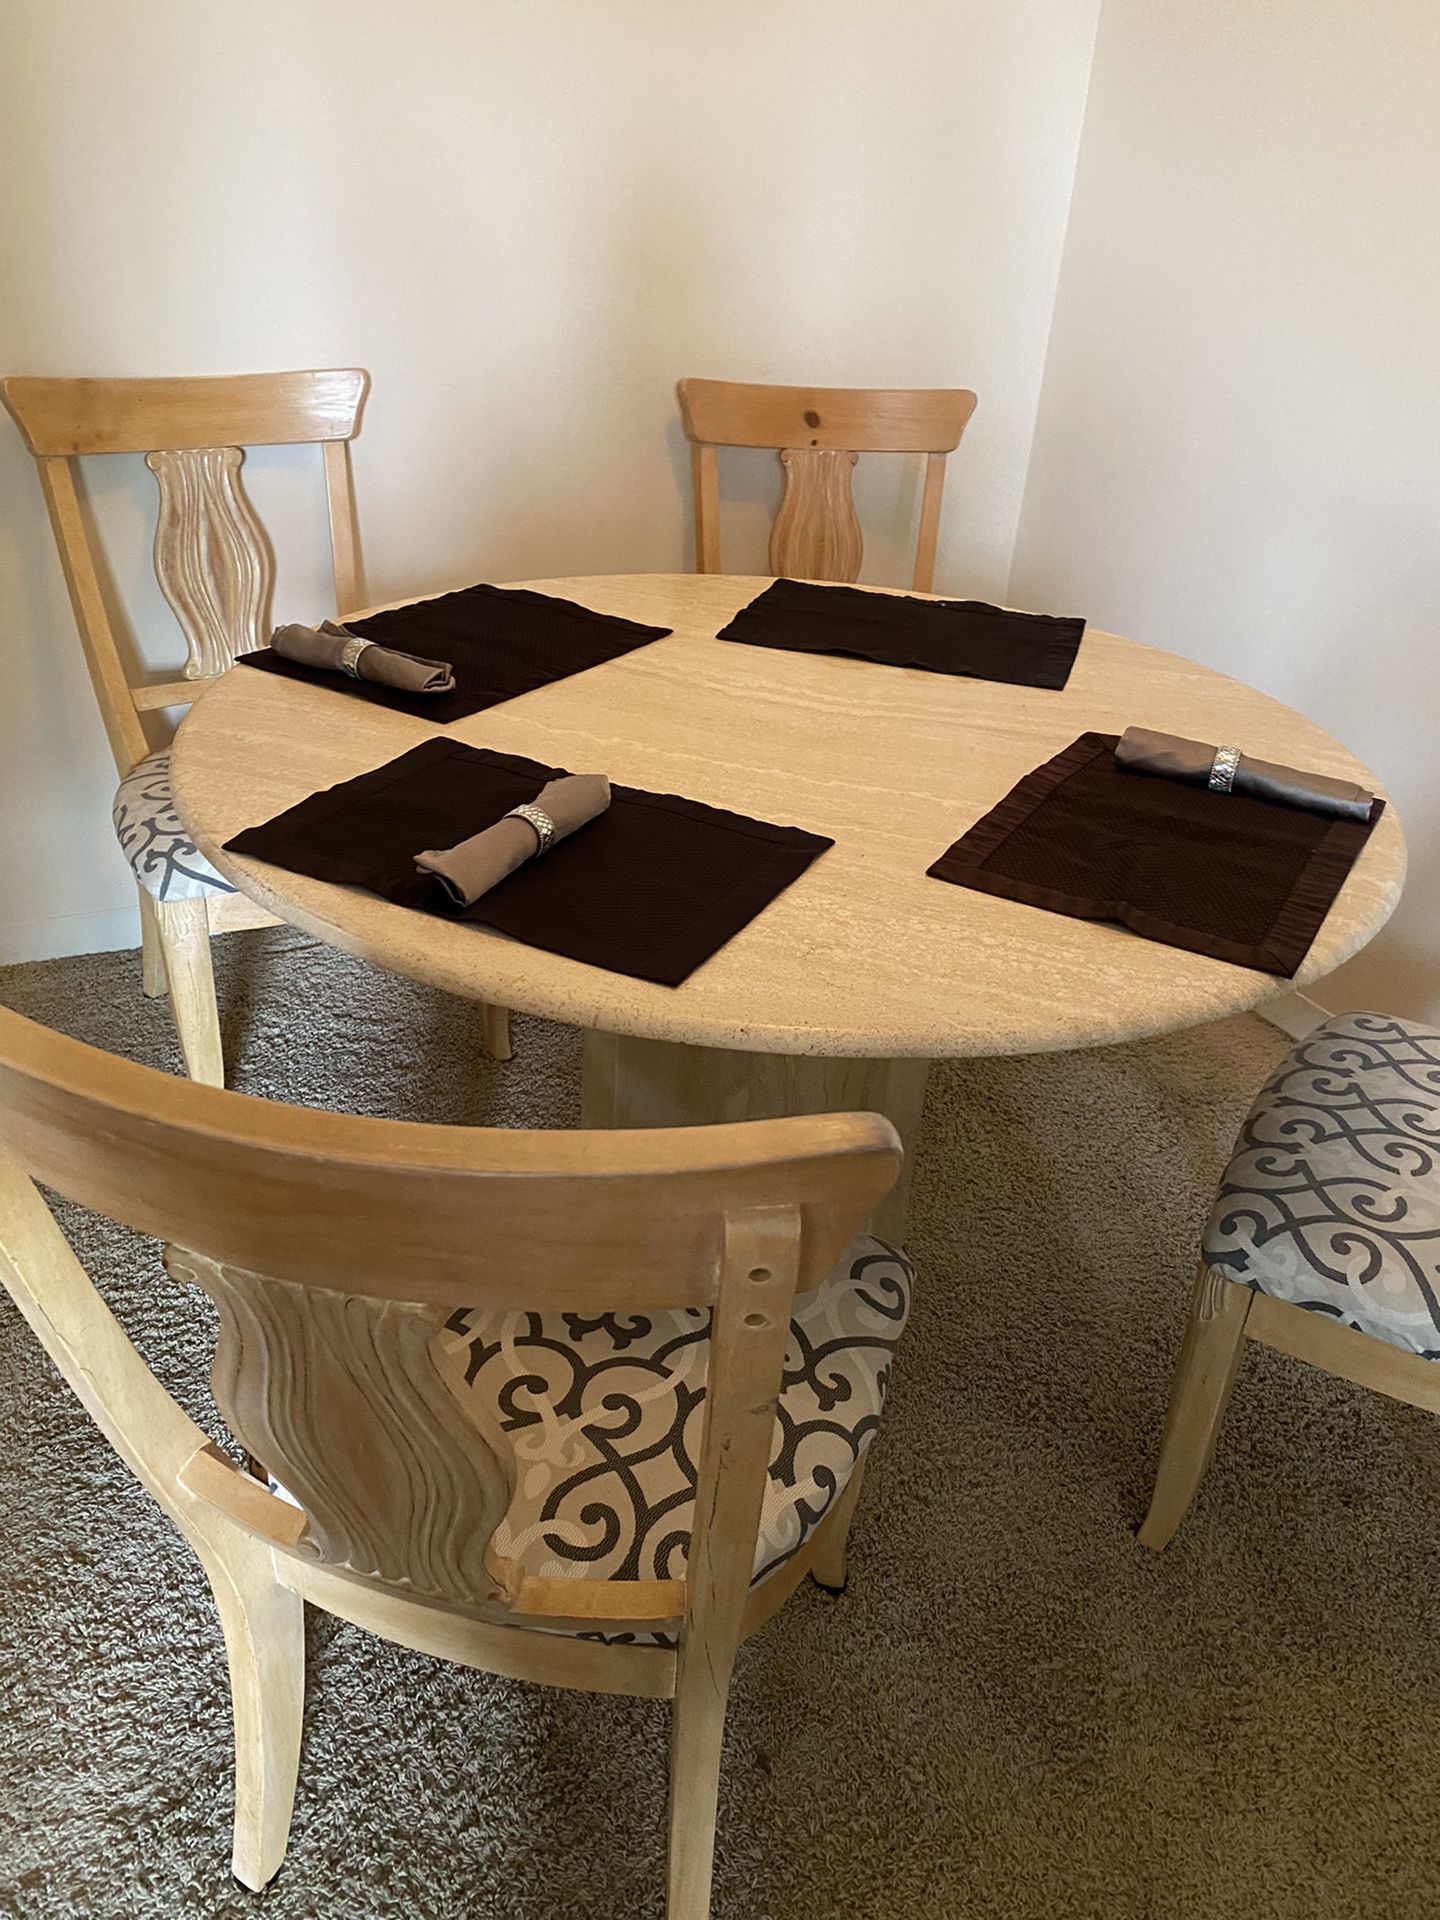 Marble round table with 4 chairs - good as new!